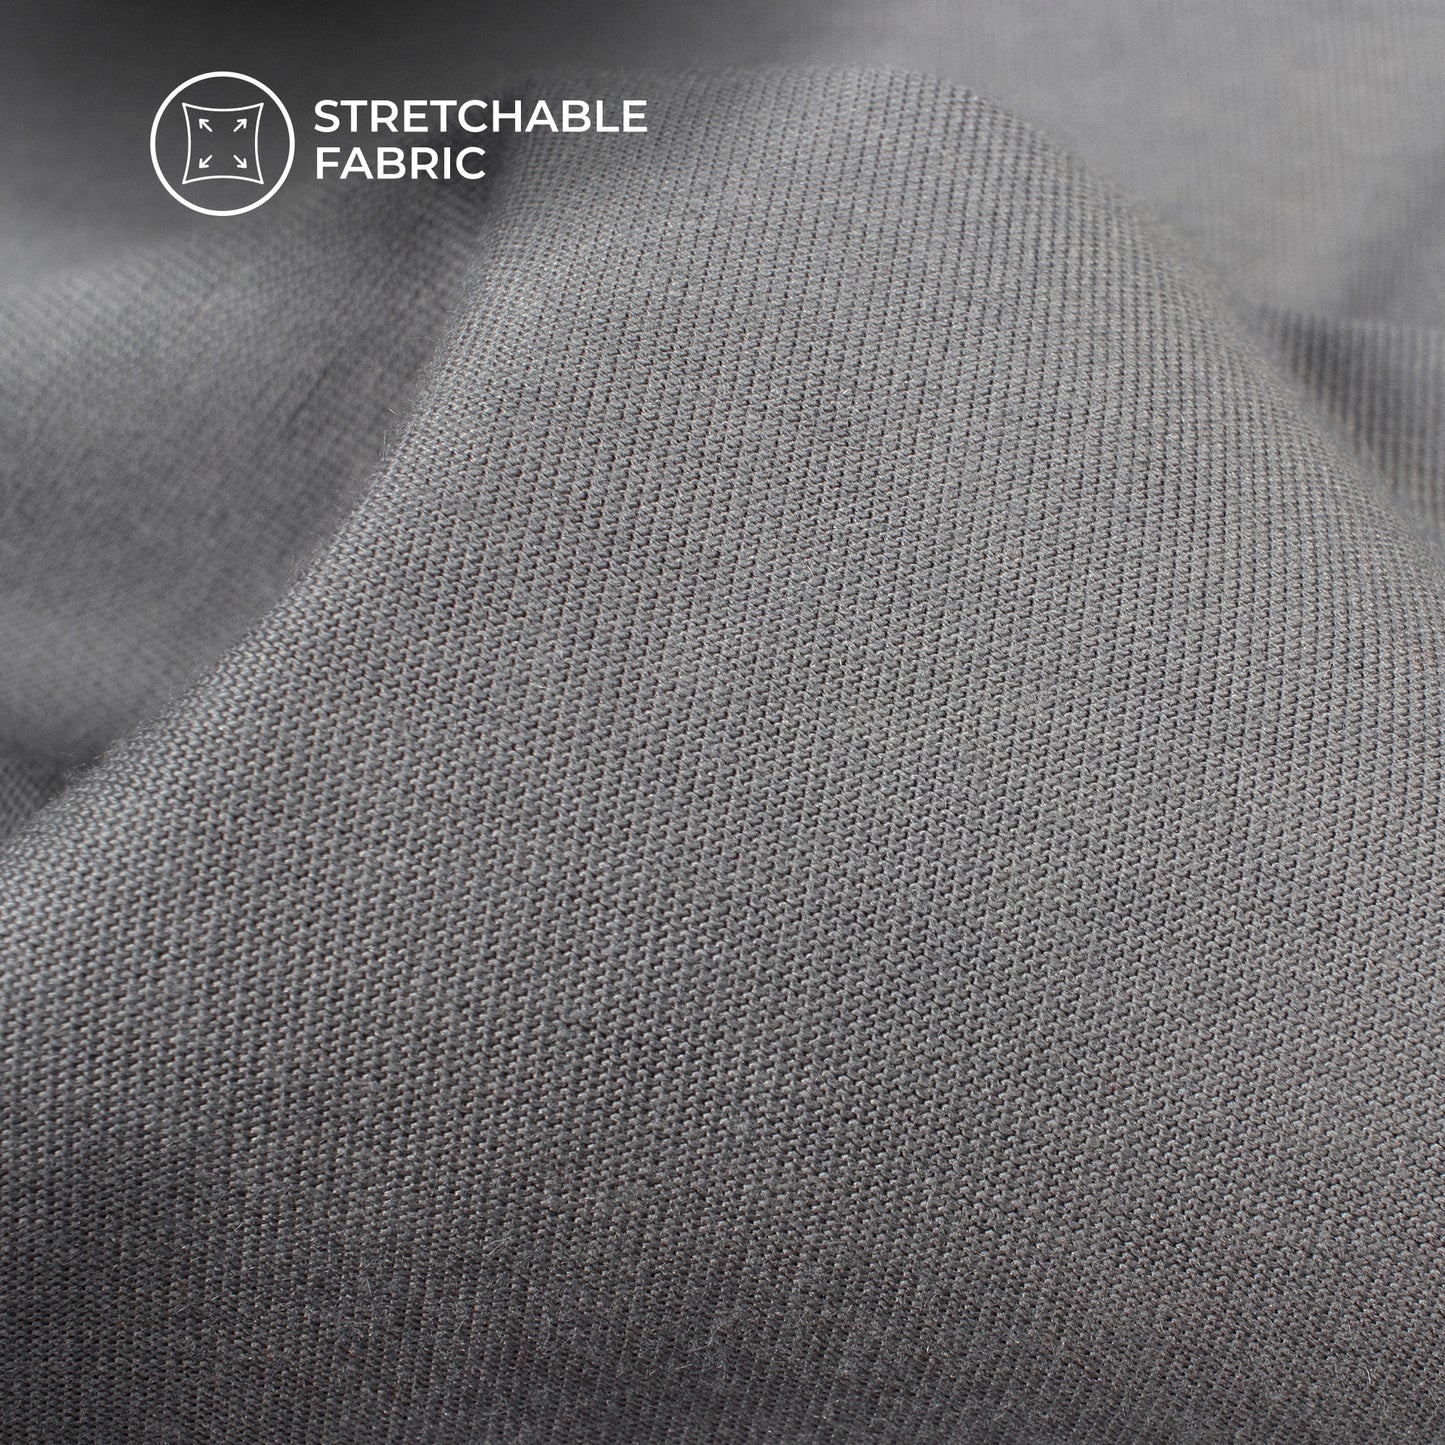 Gray Stratched Modal Cotton Lycra Fabric (Width 70 Inches)